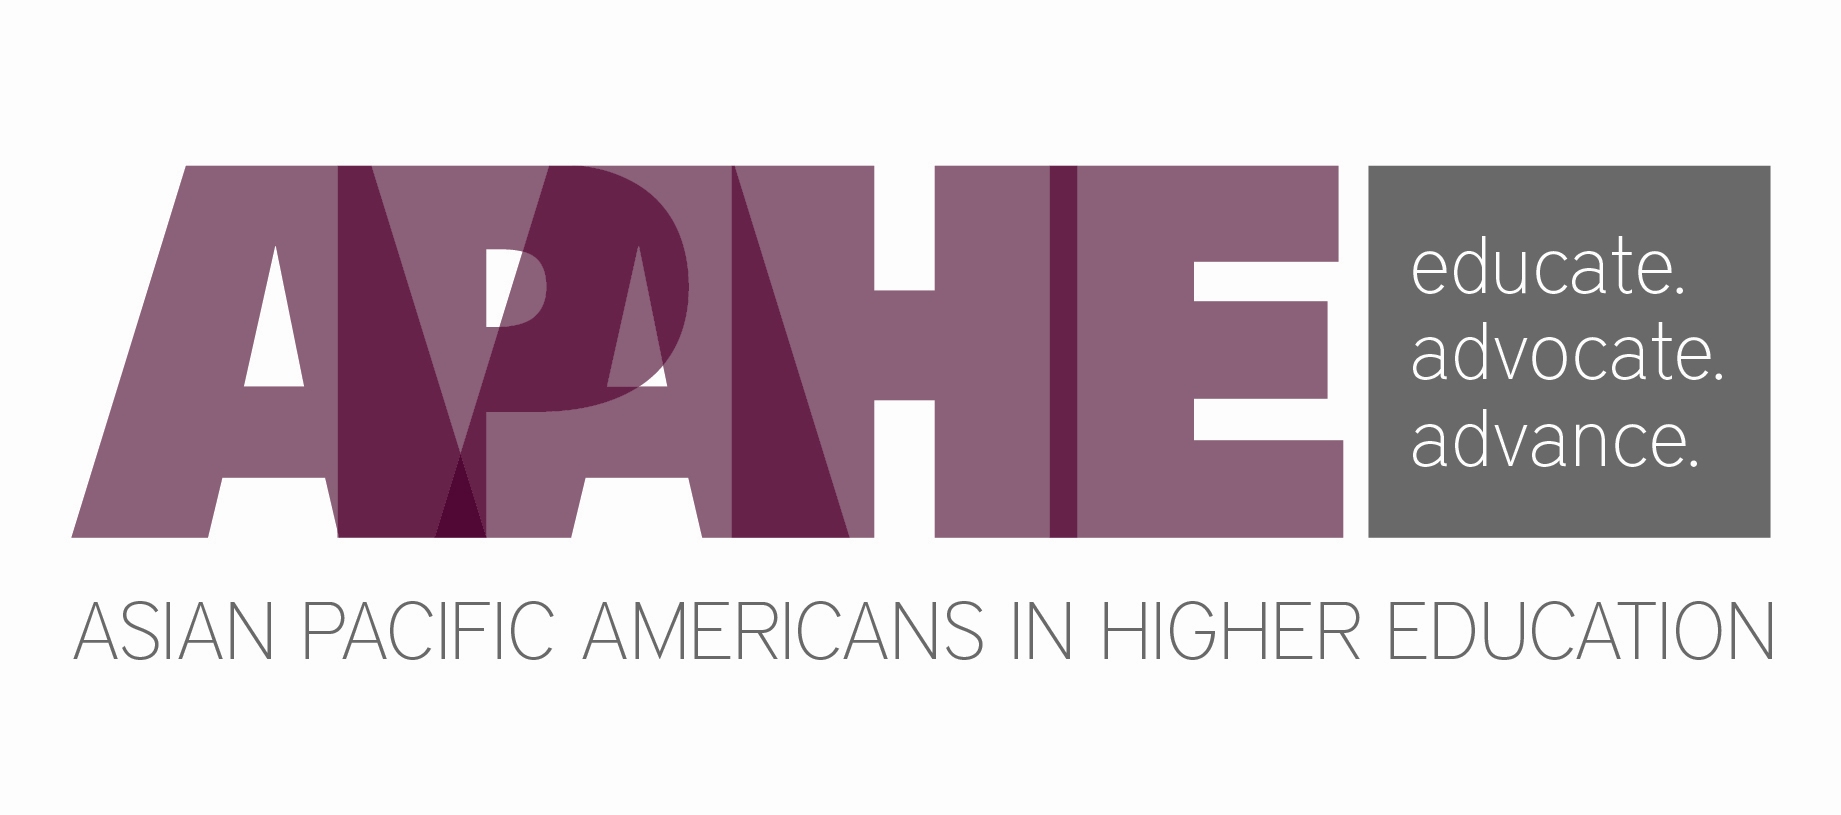 Asian Pacific Americans in Higher Education (APAHE)